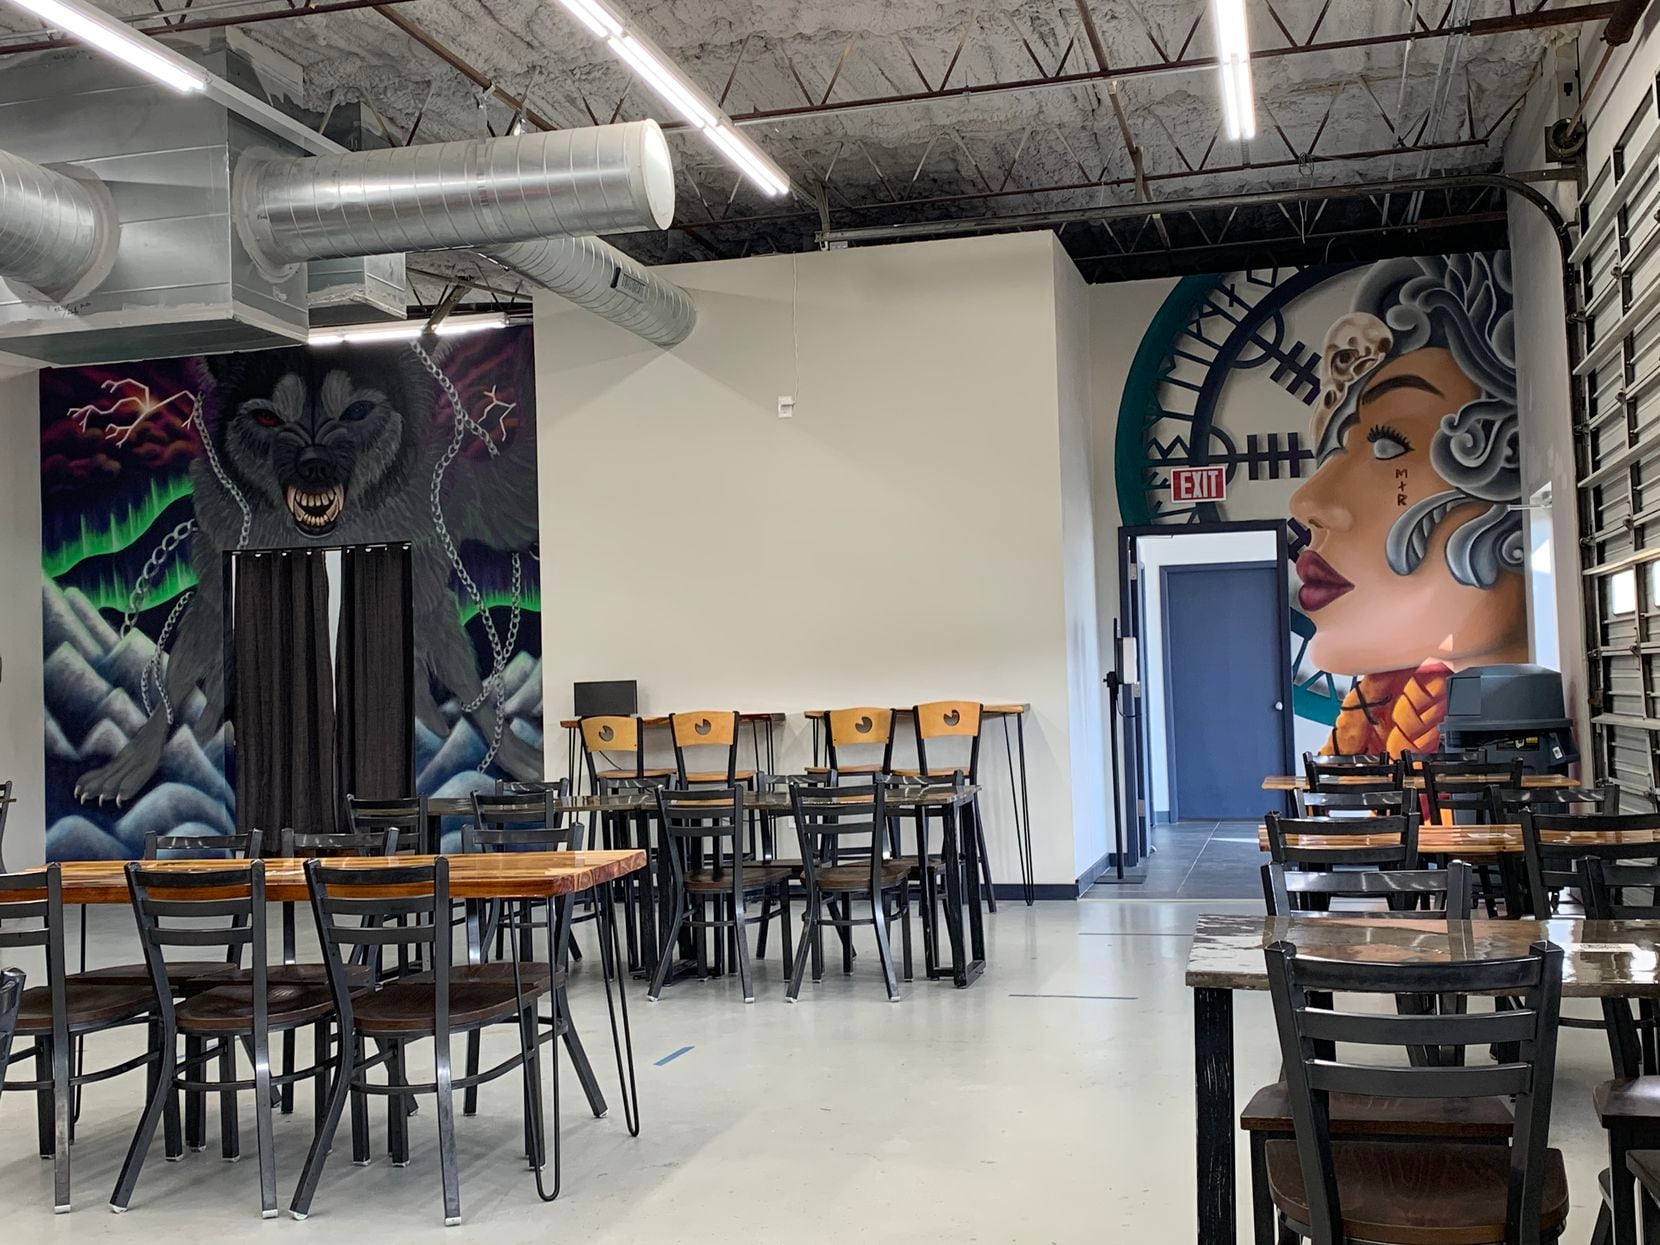 False Idol Brewing is located in North Richland Hills